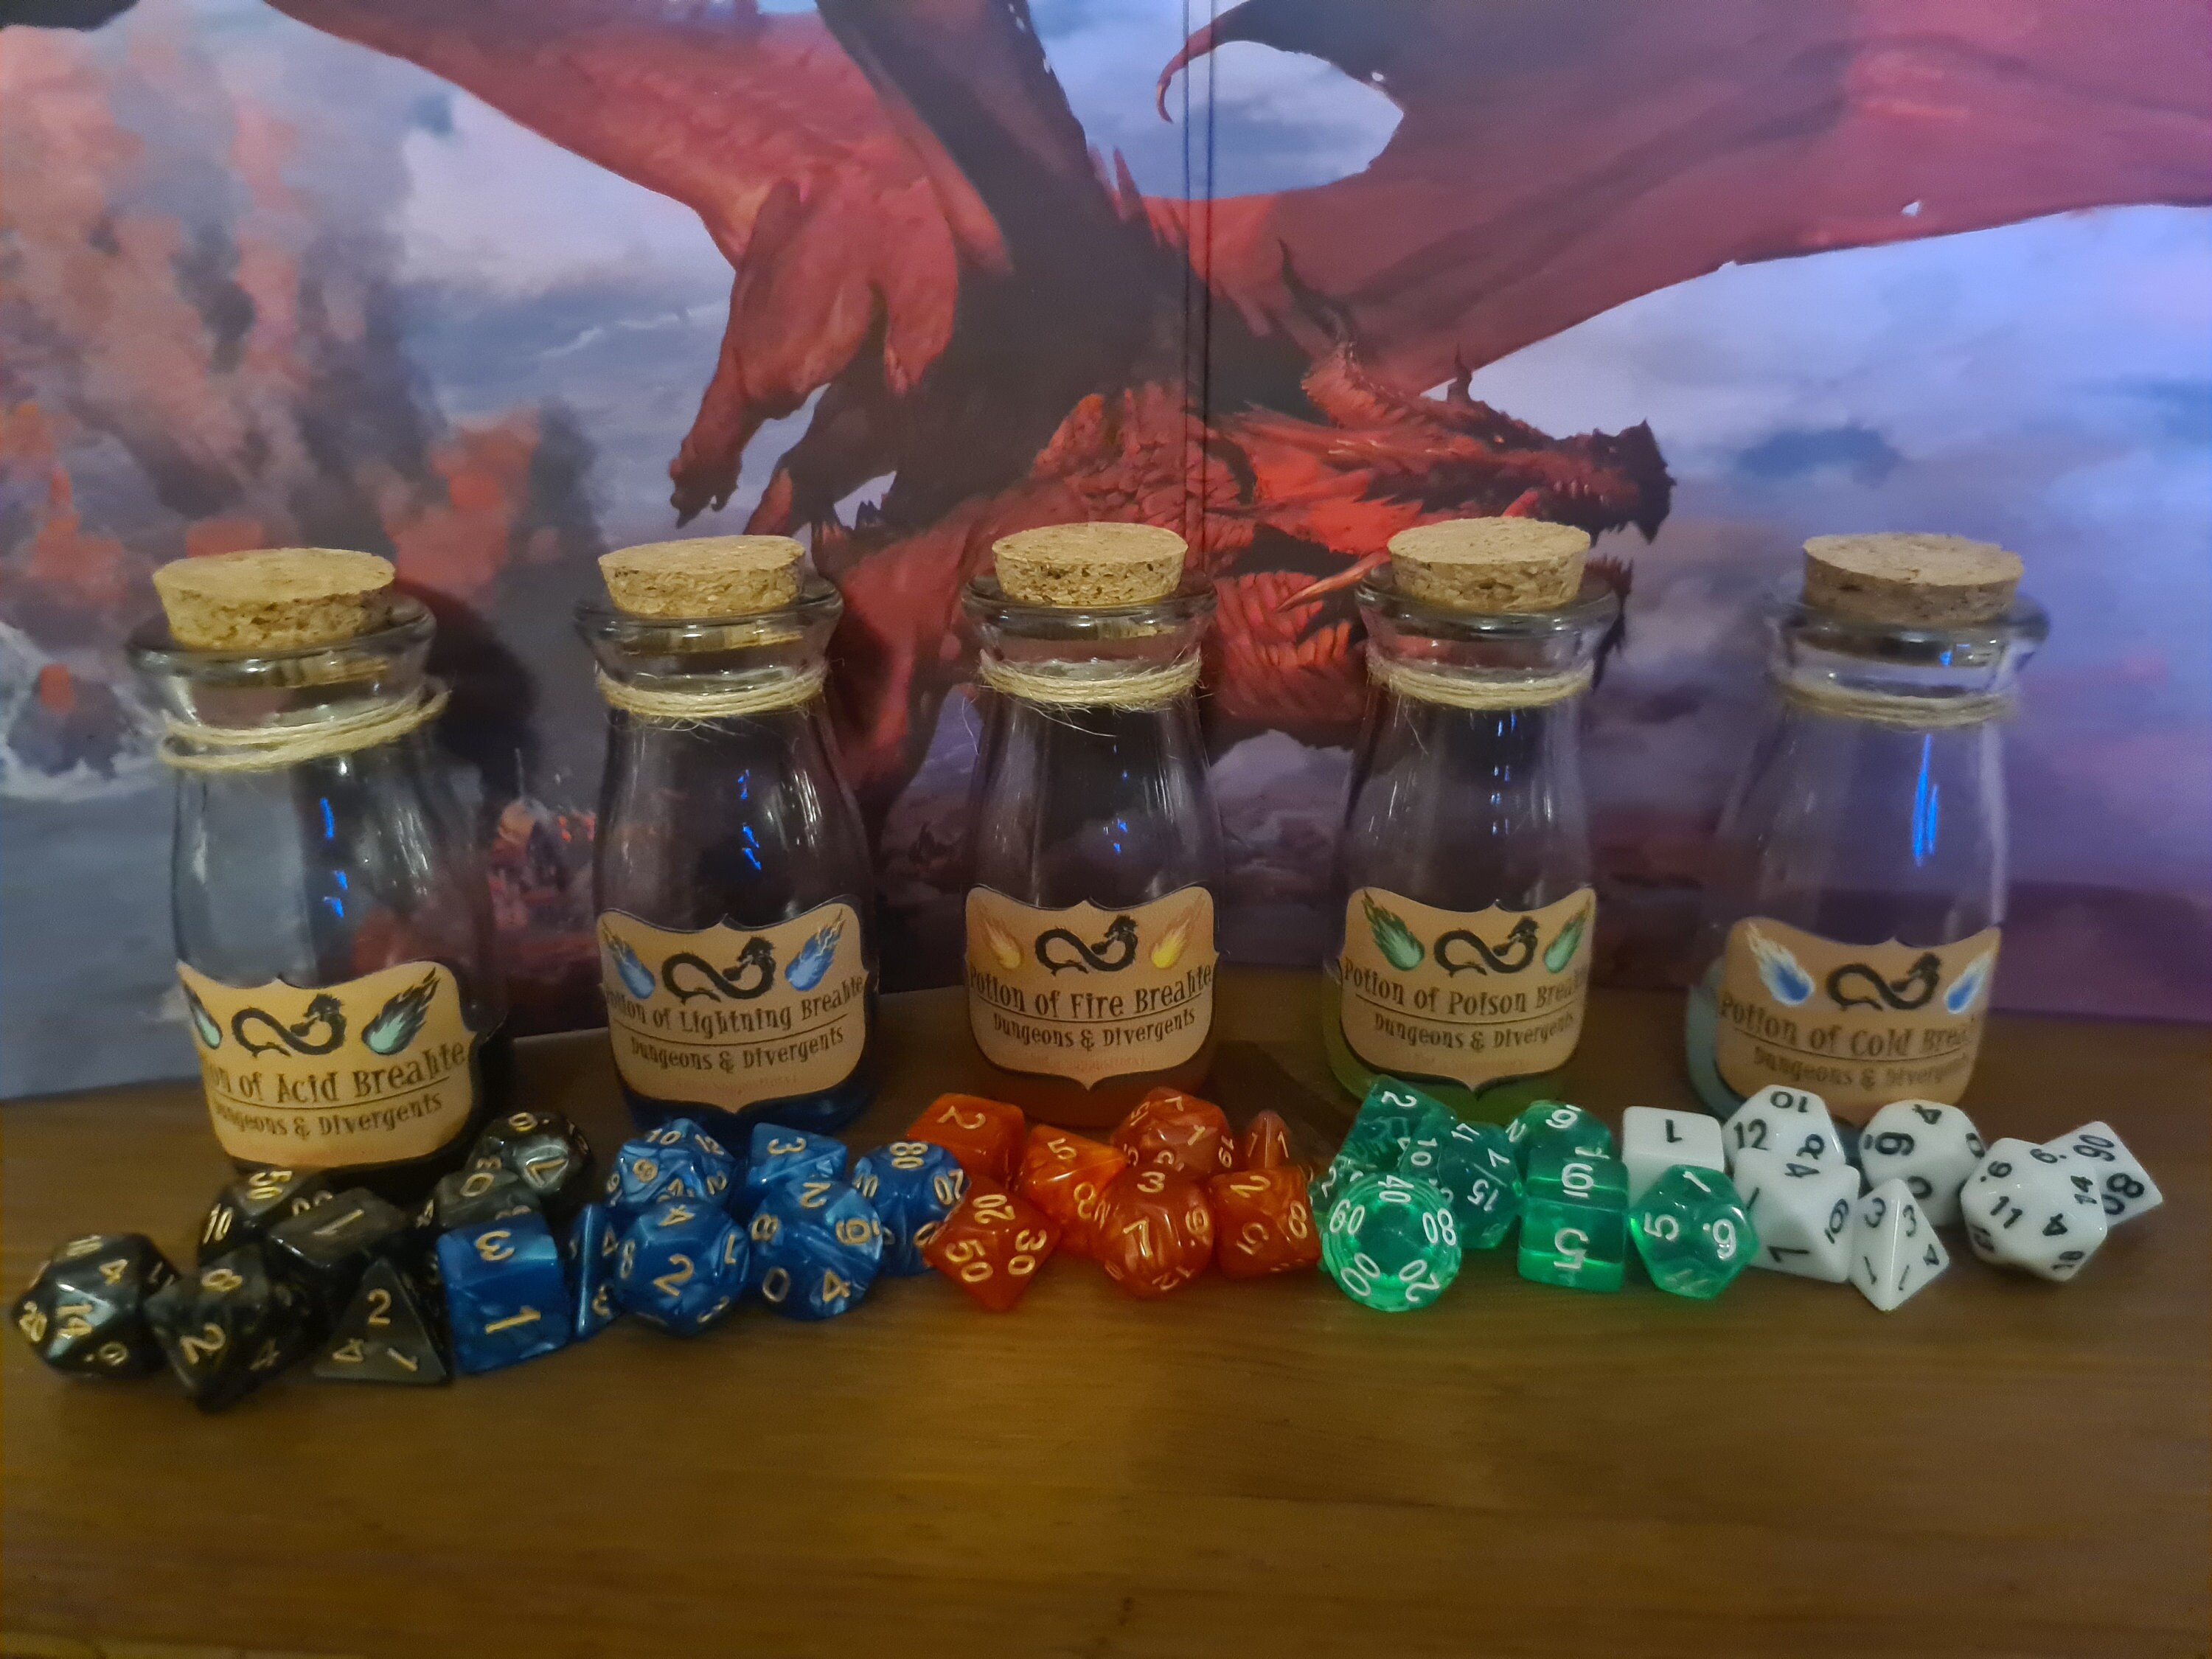 Inspired by Harry Potter- Set of 4 Potions